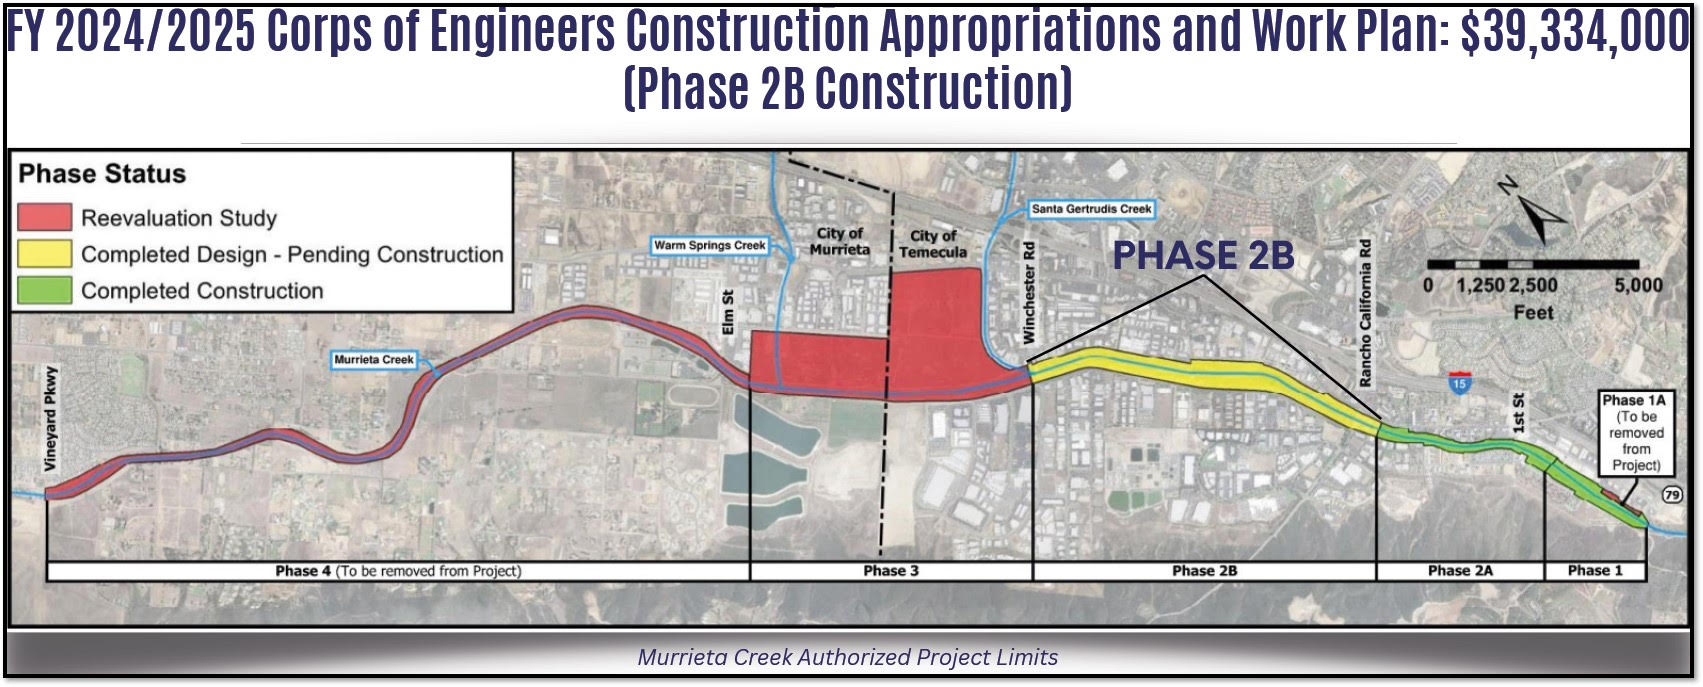 393m Federal Funds Secured For The Murrieta Creek Flood Control Project Phase 2b Through 2028